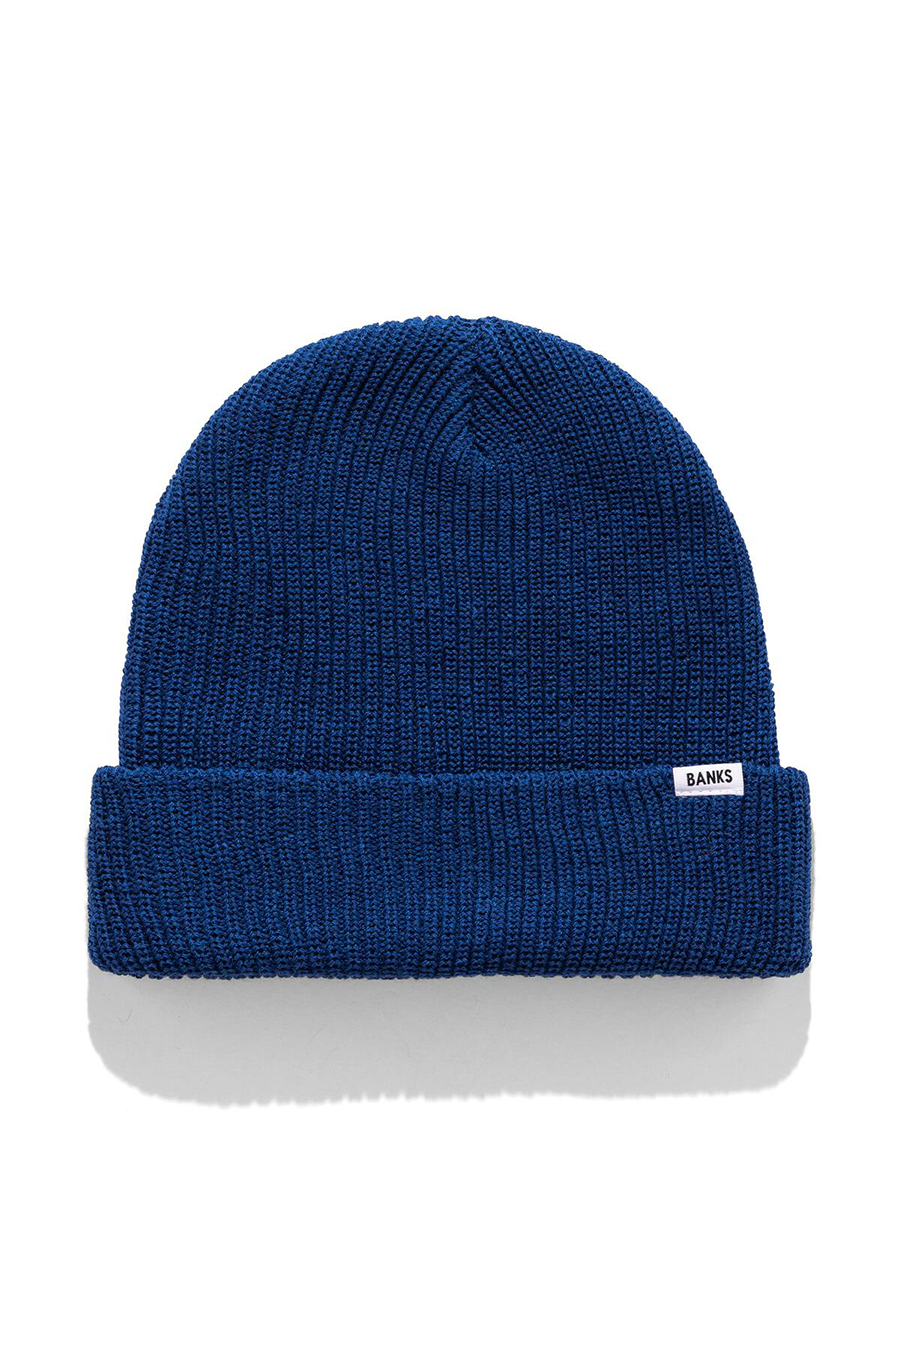 Primary Beanie | Newport Blue - Main Image Number 1 of 2